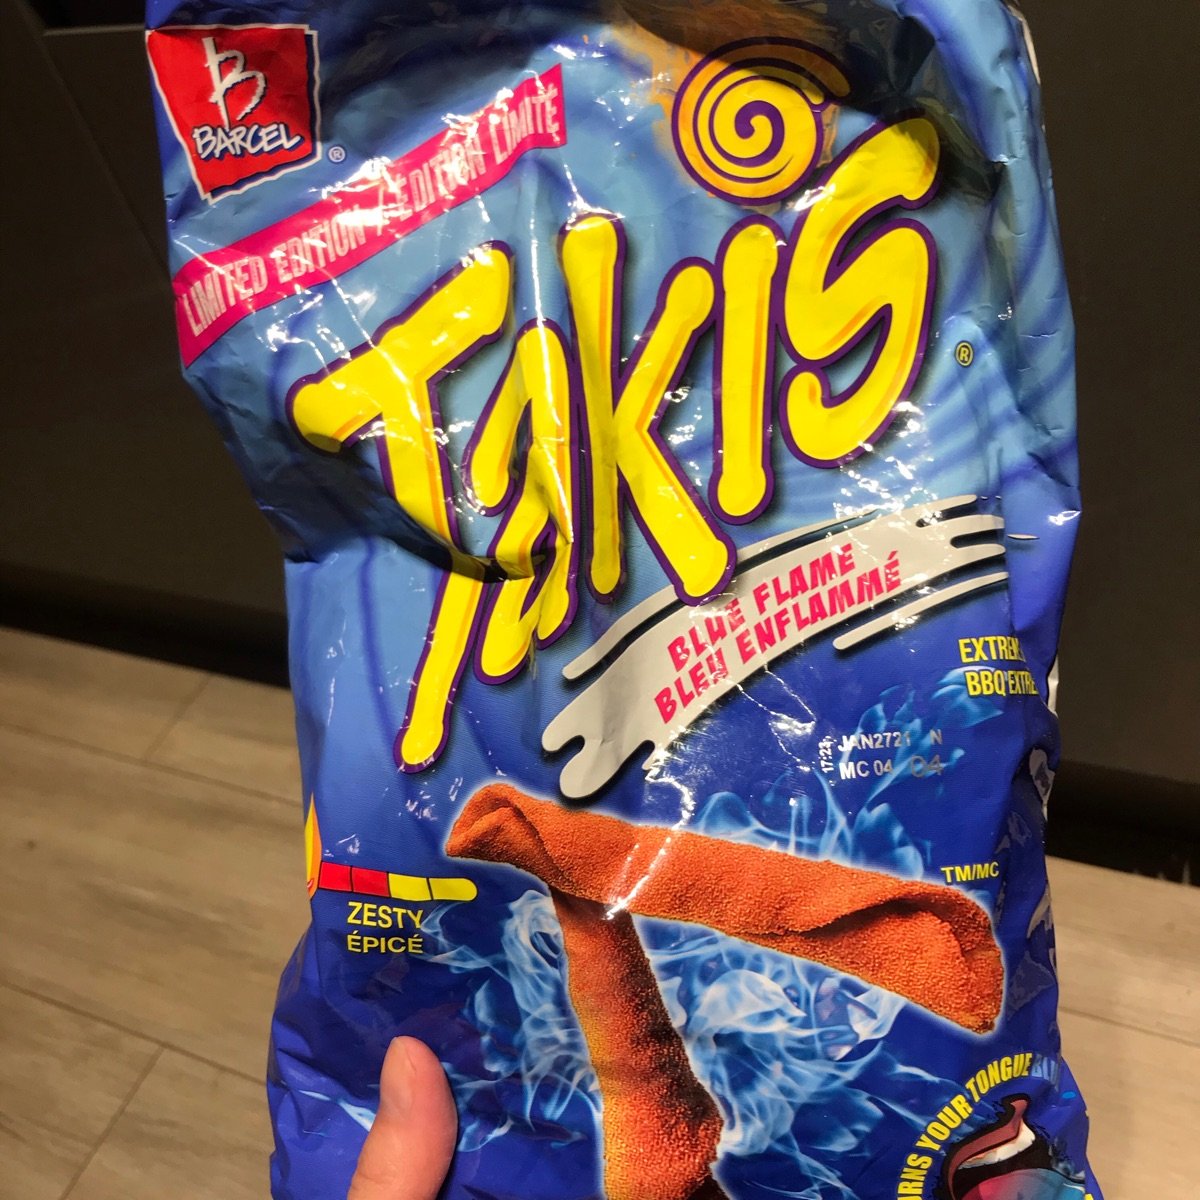 Takis that turn your tongue blue for some reason. : r/StupidFood